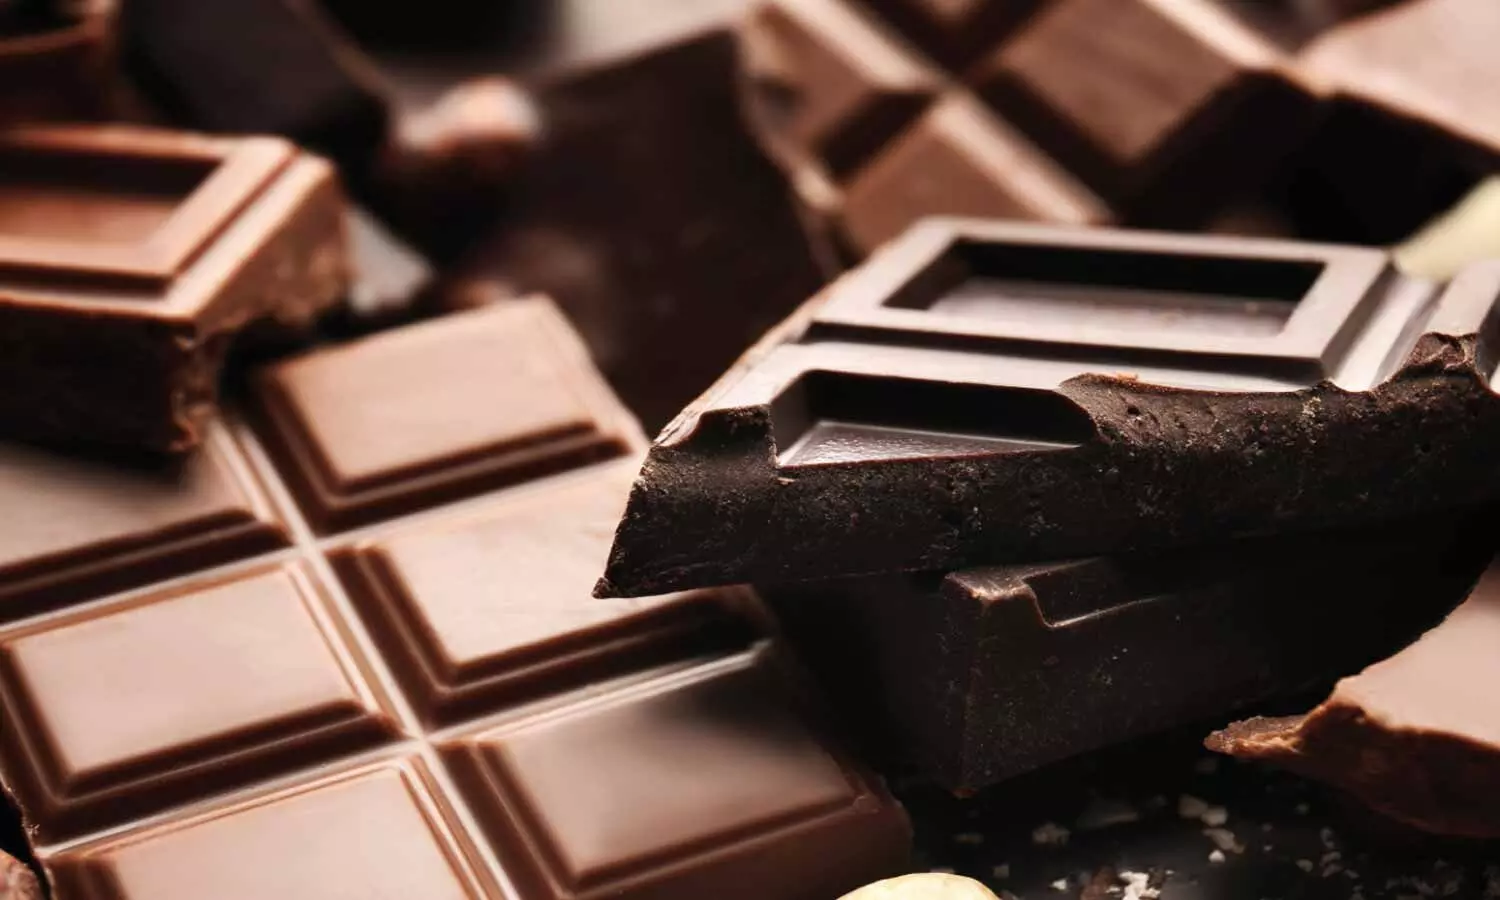 Chocolate consumption may decrease BMI and waist circumference